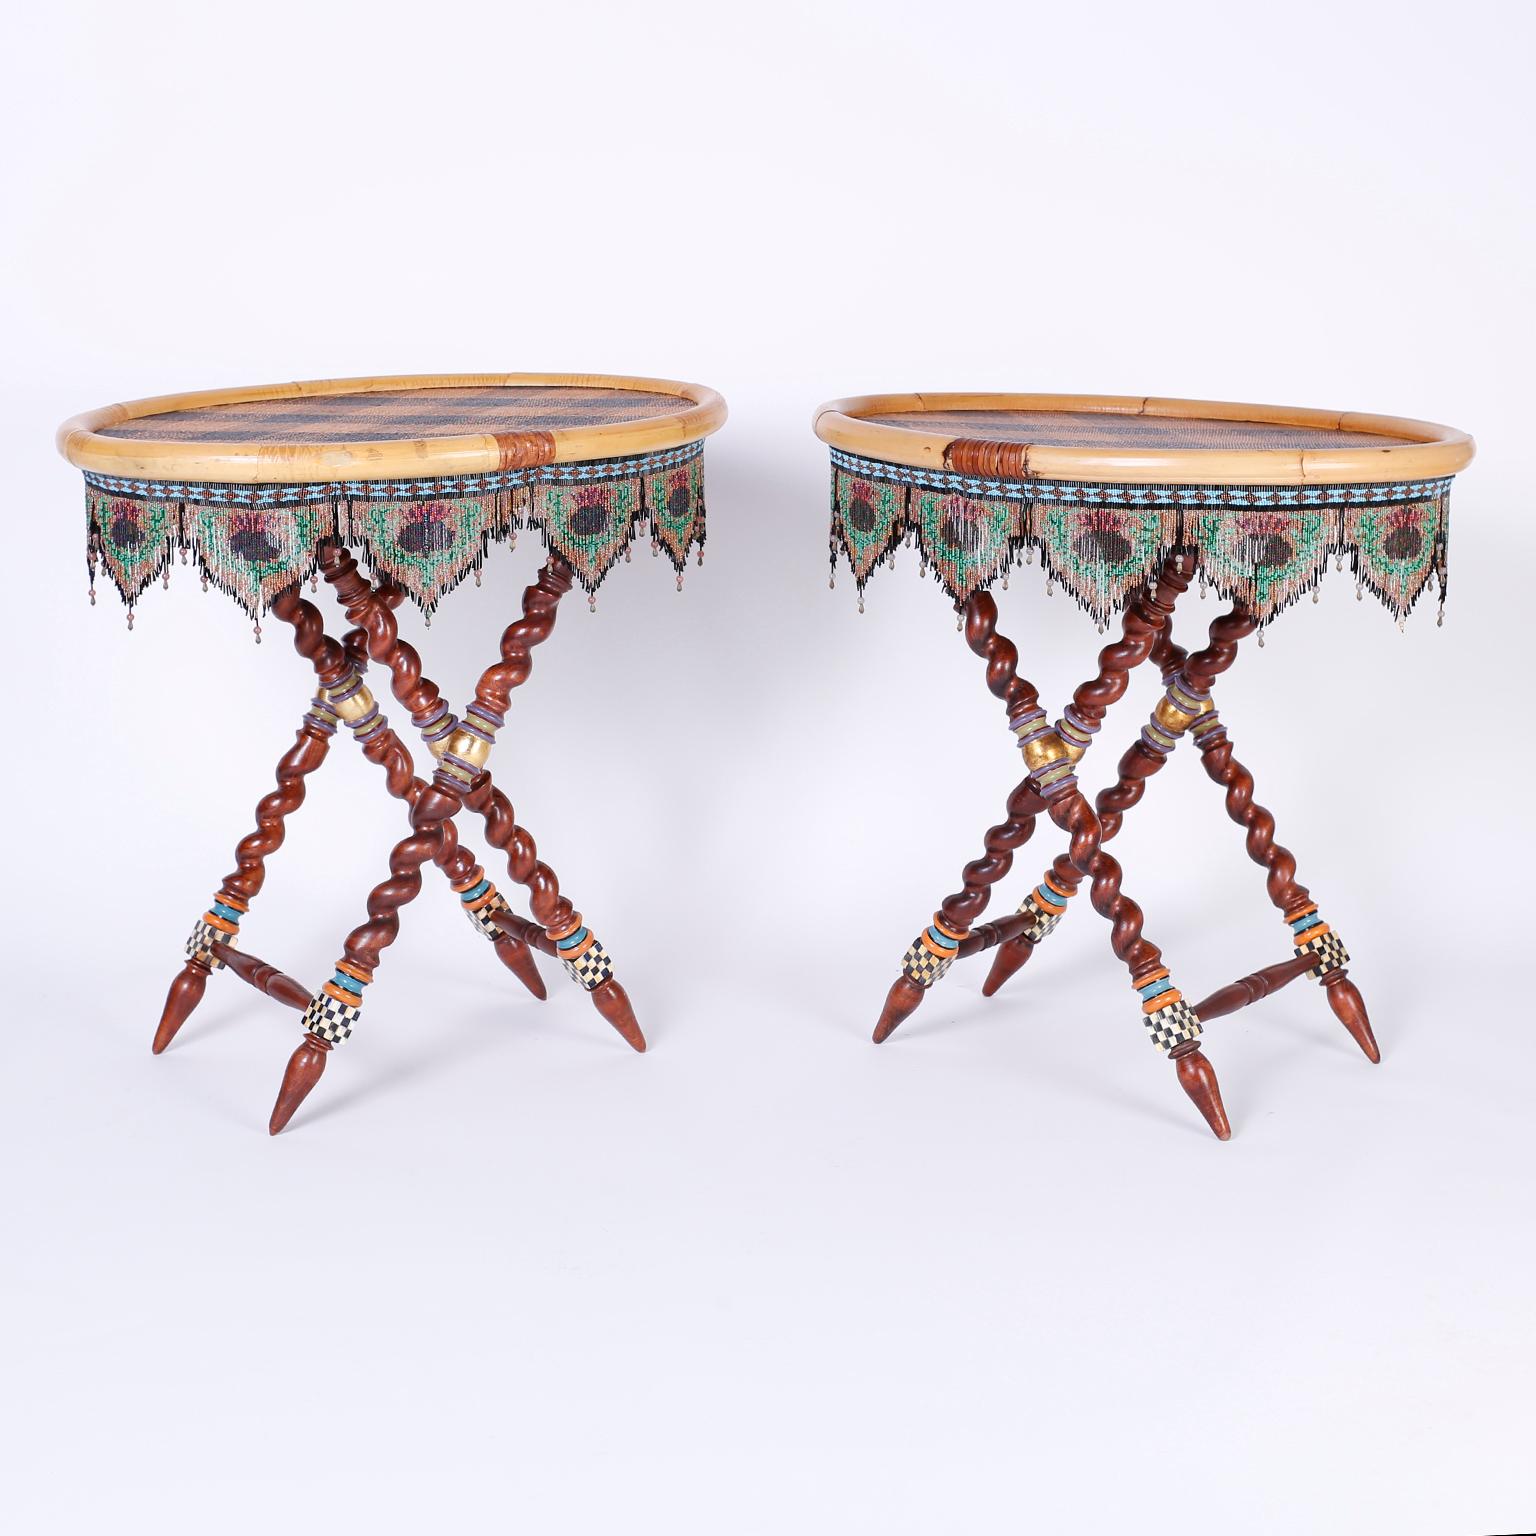 British Colonial Pair of Oval Collapsible Tray Top Tables in Wicker and Bamboo